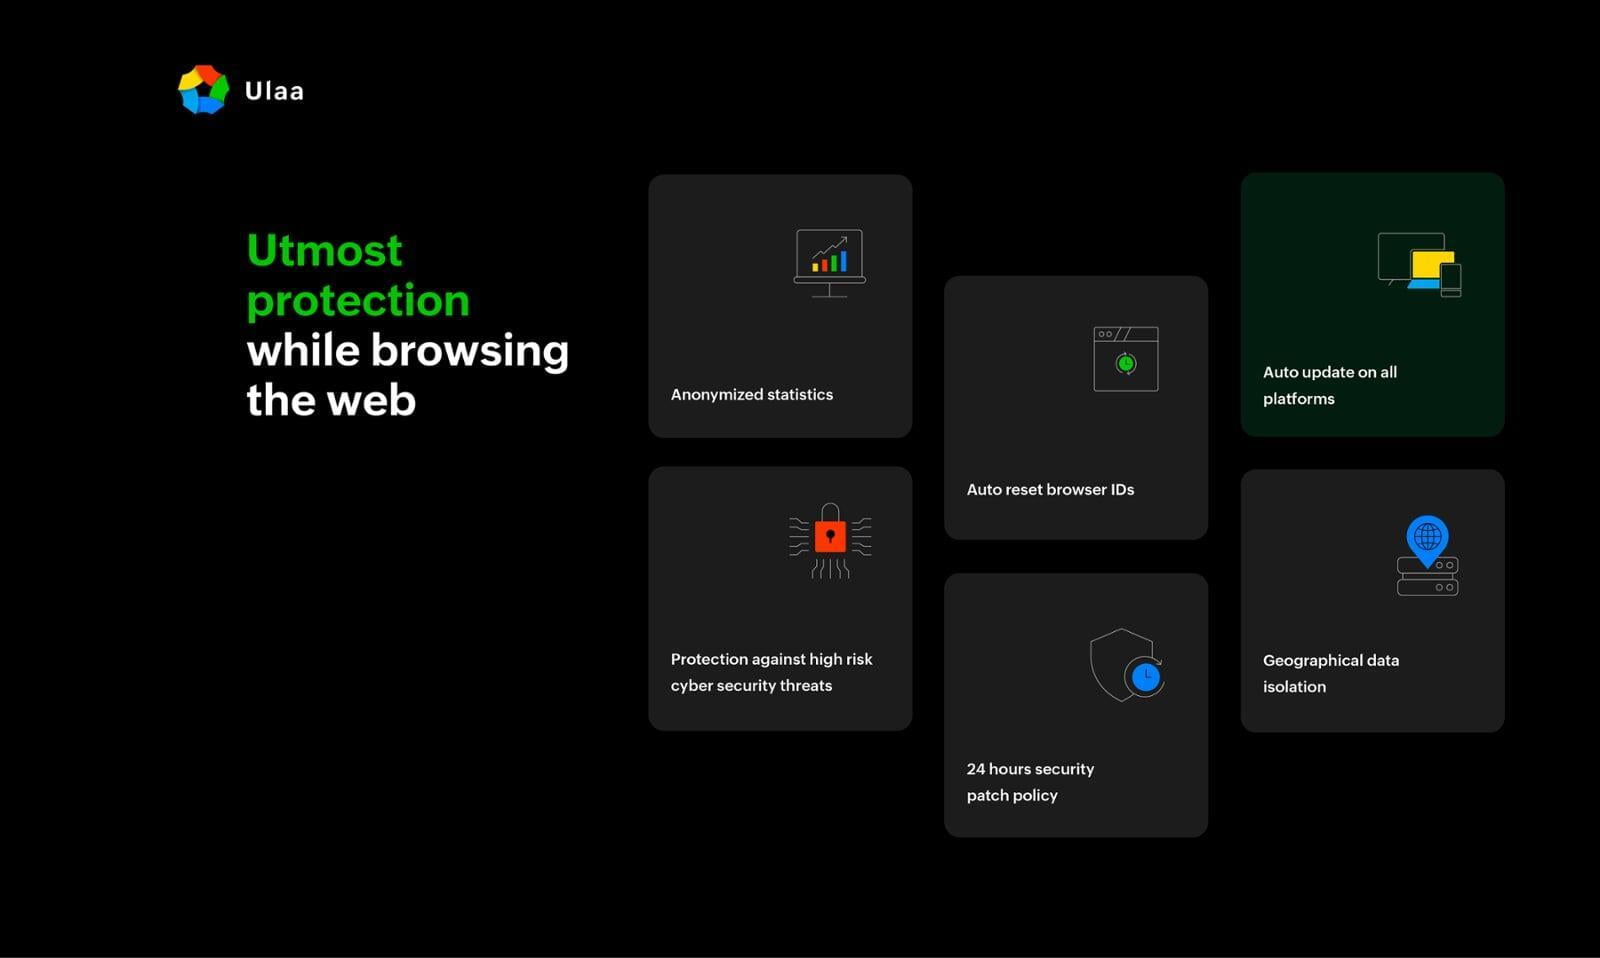 Ulaa - a new privacy-focused browser from Zoho